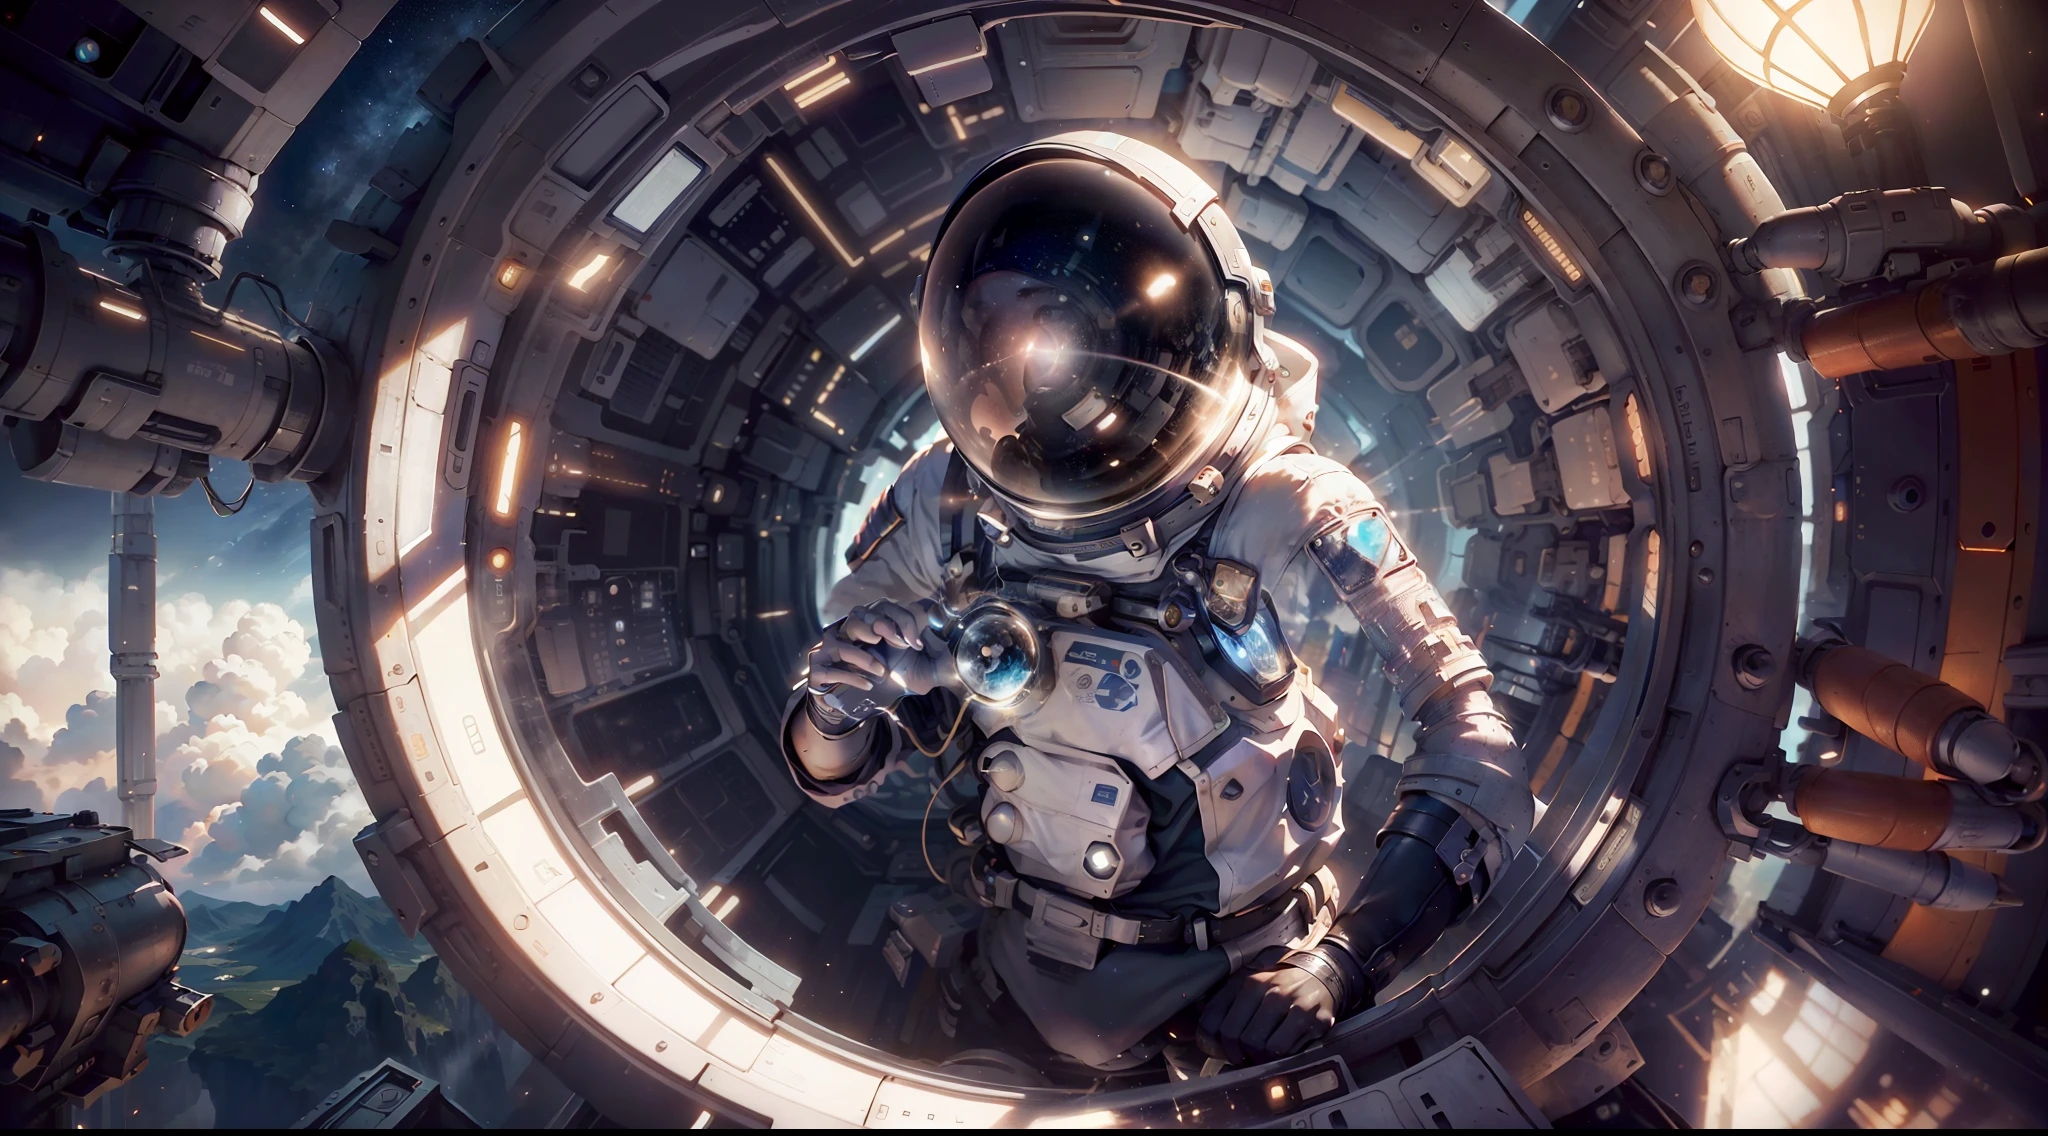 (Obra-prima, fotorrealista: 1.4), (intrepid man: 1.2), (Technologically advanced spacesuit: 1.2), (Determined expression: 1.1), (Foguete gigantesco: 1.3), (gleaming metal platform: 1.2) In this stunning, high-resolution image, A fearless man prepares to embark on an epic journey into space. Every detail is meticulously captured, From the tiny bolts of the spacesuit to the intricate details of the colossal rocket next to it. O astronauta, com seu traje espacial de alta tecnologia, It seems to have been taken directly from a science fiction movie. The costume is a marvel of detail, with textured surfaces and a profusion of buttons and lights, todos refletindo a luz do sol de maneira impressionante. His determined expression demonstrates the courage it takes to face the unknown. Ao seu lado, o foguete gigantesco domina a cena. Each pane and window renders to perfection, revelando a complexidade da tecnologia envolvida. The imposing structure extends into the sky, and the soft clouds frame the scenery with a sense of immensity and possibility. The gleaming metal platform where the astronaut is positioned is a testament to the artistic precision that brought this image to life. Each reflection on the metal surface is detailed, refletindo o brilho do foguete e do traje espacial. A luz do sol ilumina tudo, creating soft shadows and enhancing the texture of each element. The scene is a true masterpiece, capturing not just the realistic look, but also the essence of space exploration. The composition is carefully balanced, with man and rocket in the spotlight, and the atmospheric background evokes a sense of wonder and excitement. With ultra-high resolution and meticulous attention to detail, This image transcends mere visual representation, allowing the viewer to feel the excitement and grandeur of the journey that is about to begin.